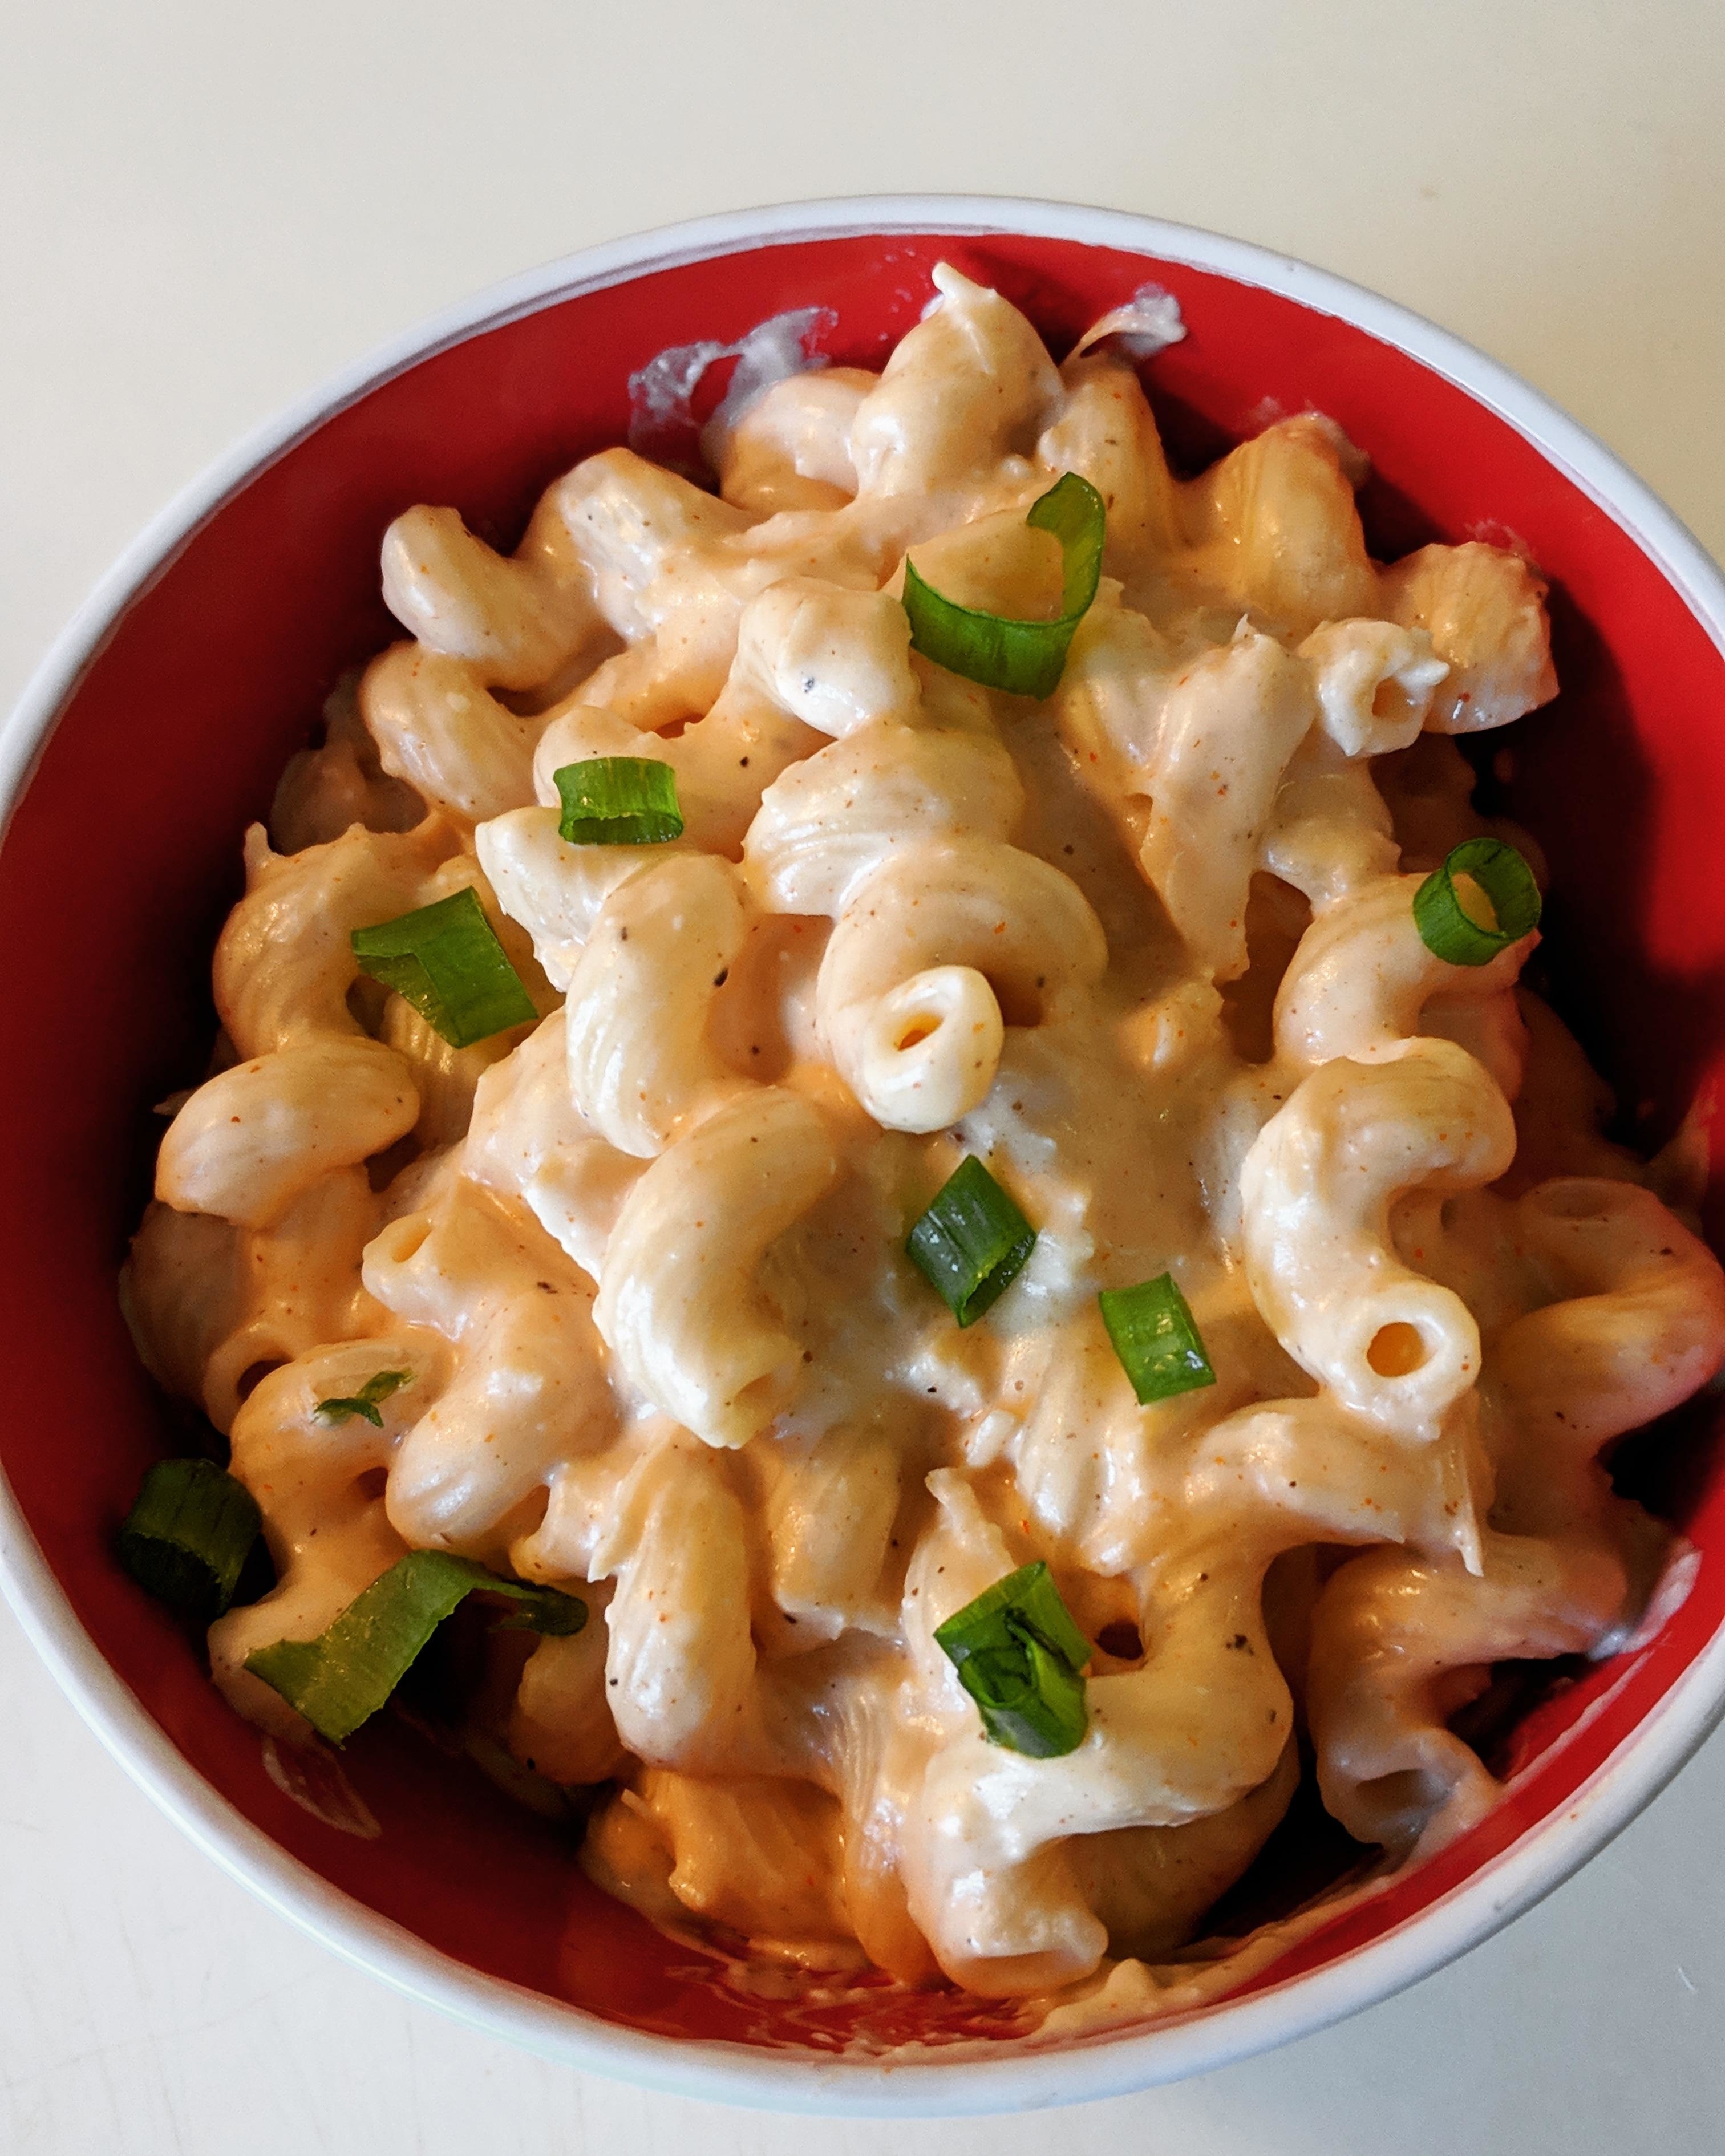 Bowl of macaroni and cheese garnished with green onions